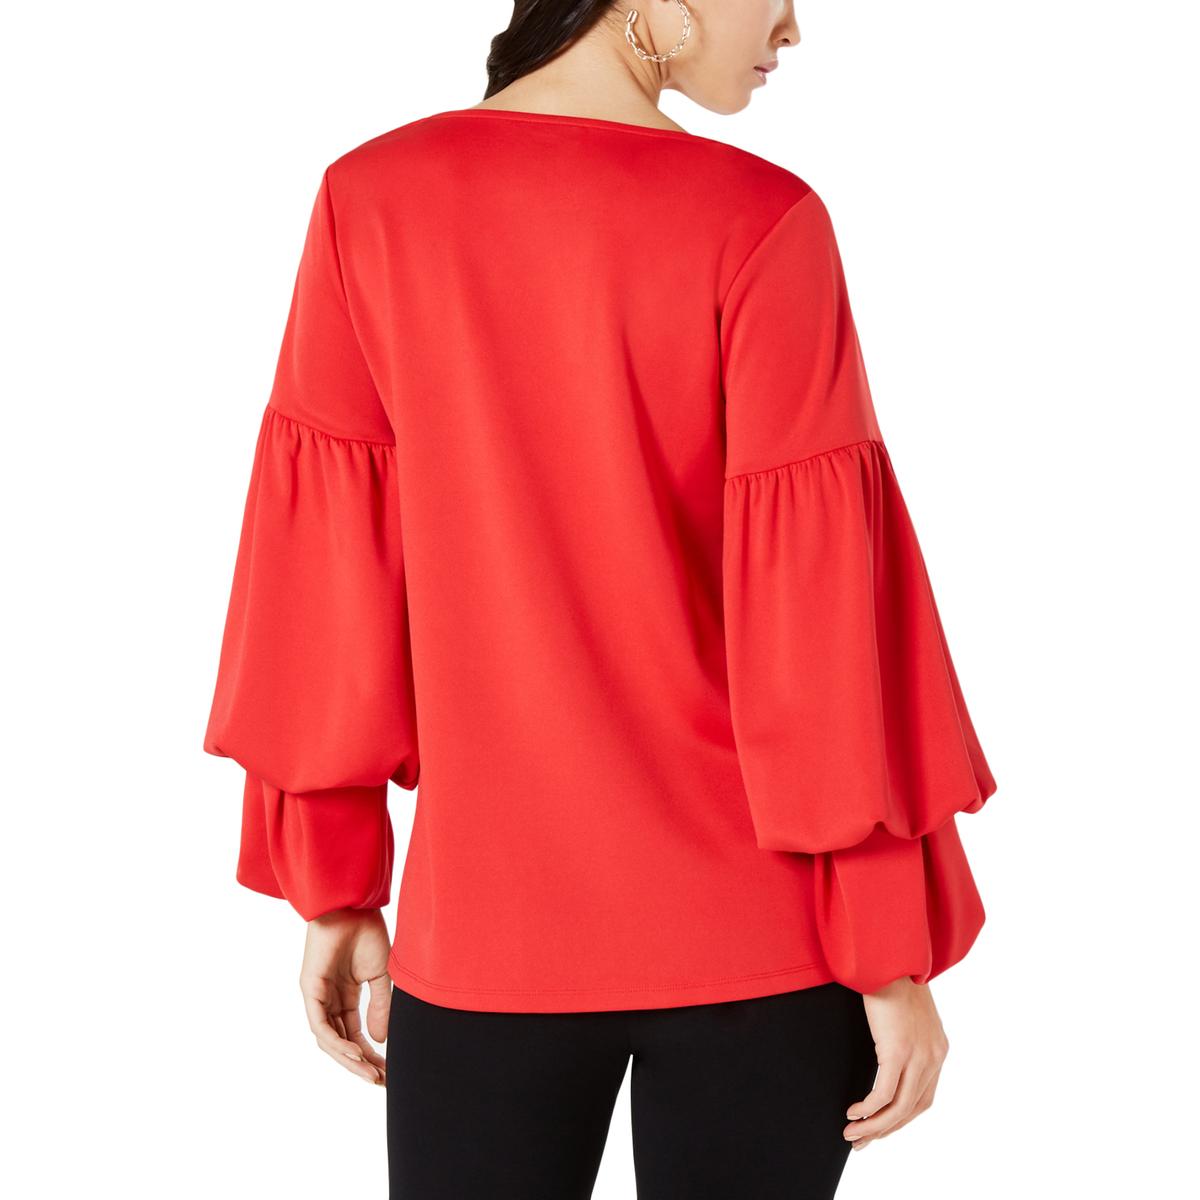 Alfani Womens Red Stretch Bubble Sleeves Blouse Pullover Top Shirt XL